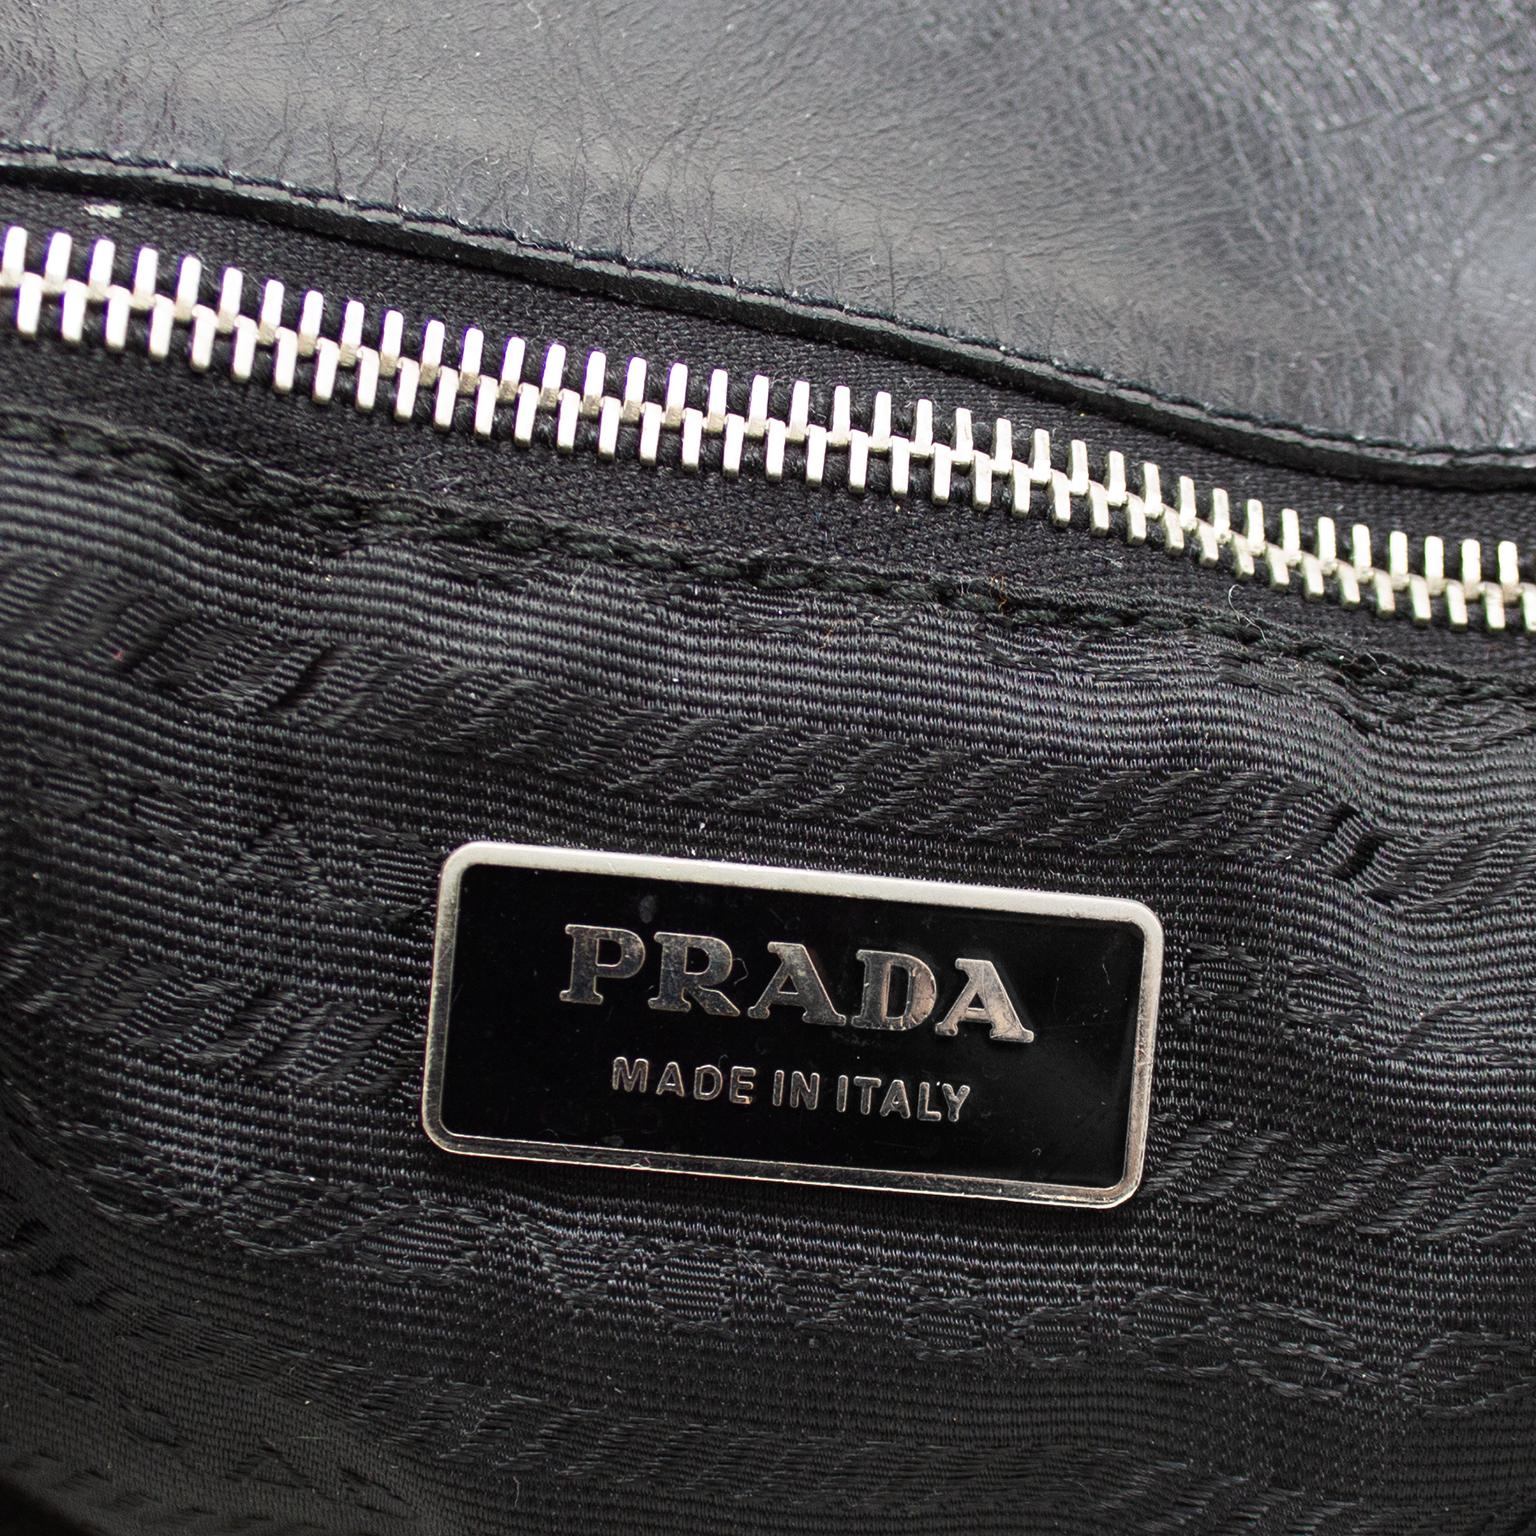 Early 2000s Prada Beige Canvas Tote with Black Patent Leather  For Sale 4